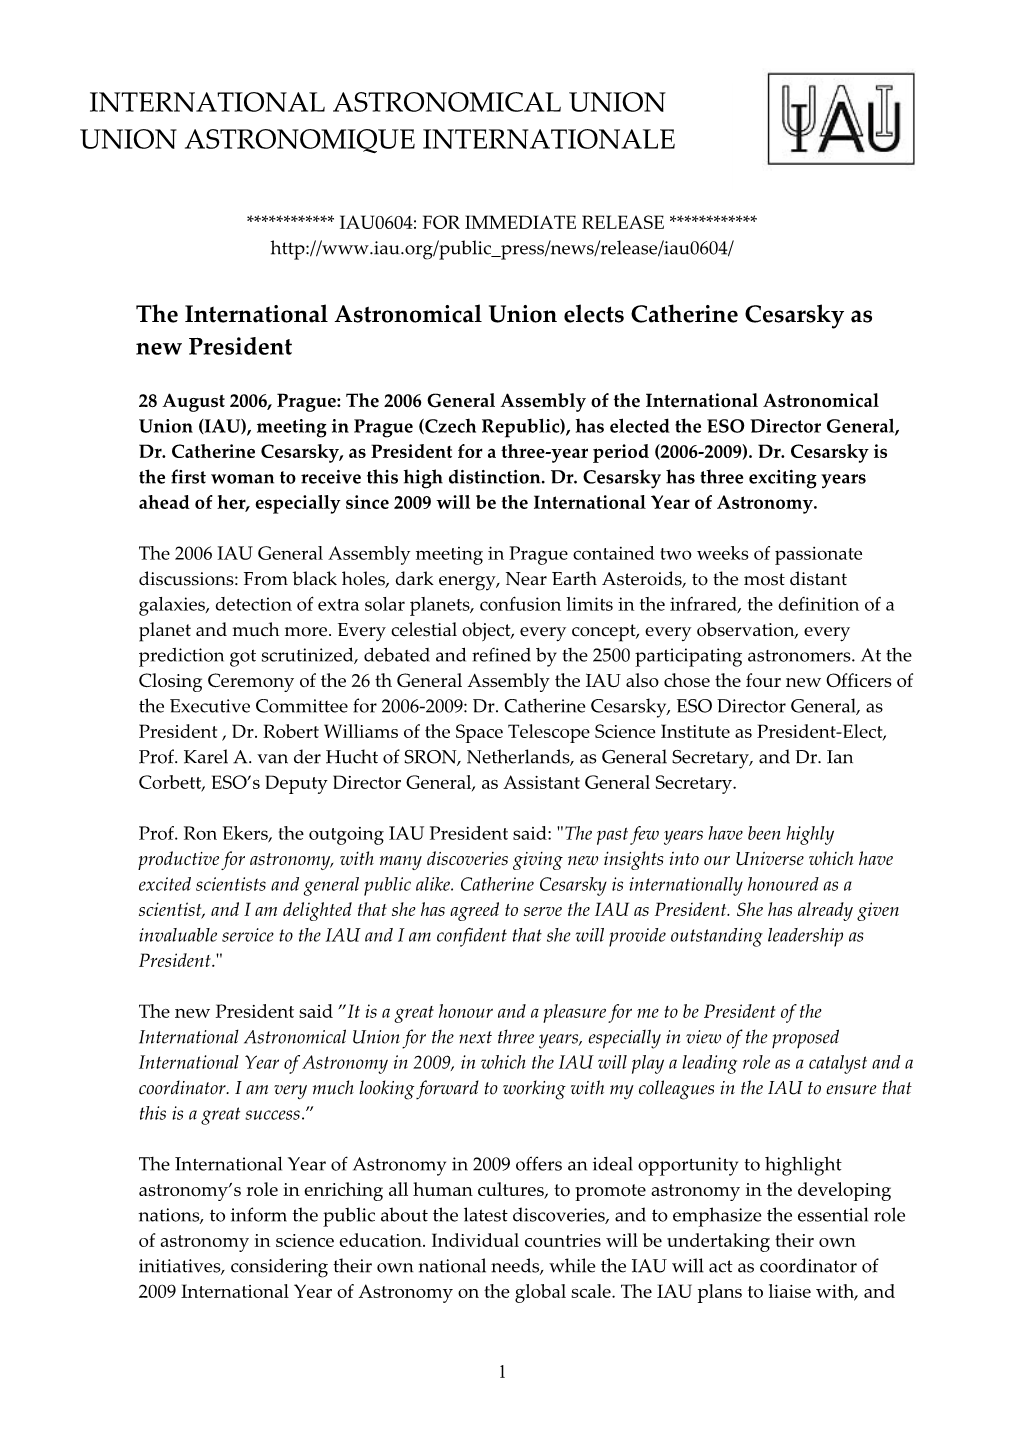 The International Astronomical Union Elects Catherine Cesarsky As New President